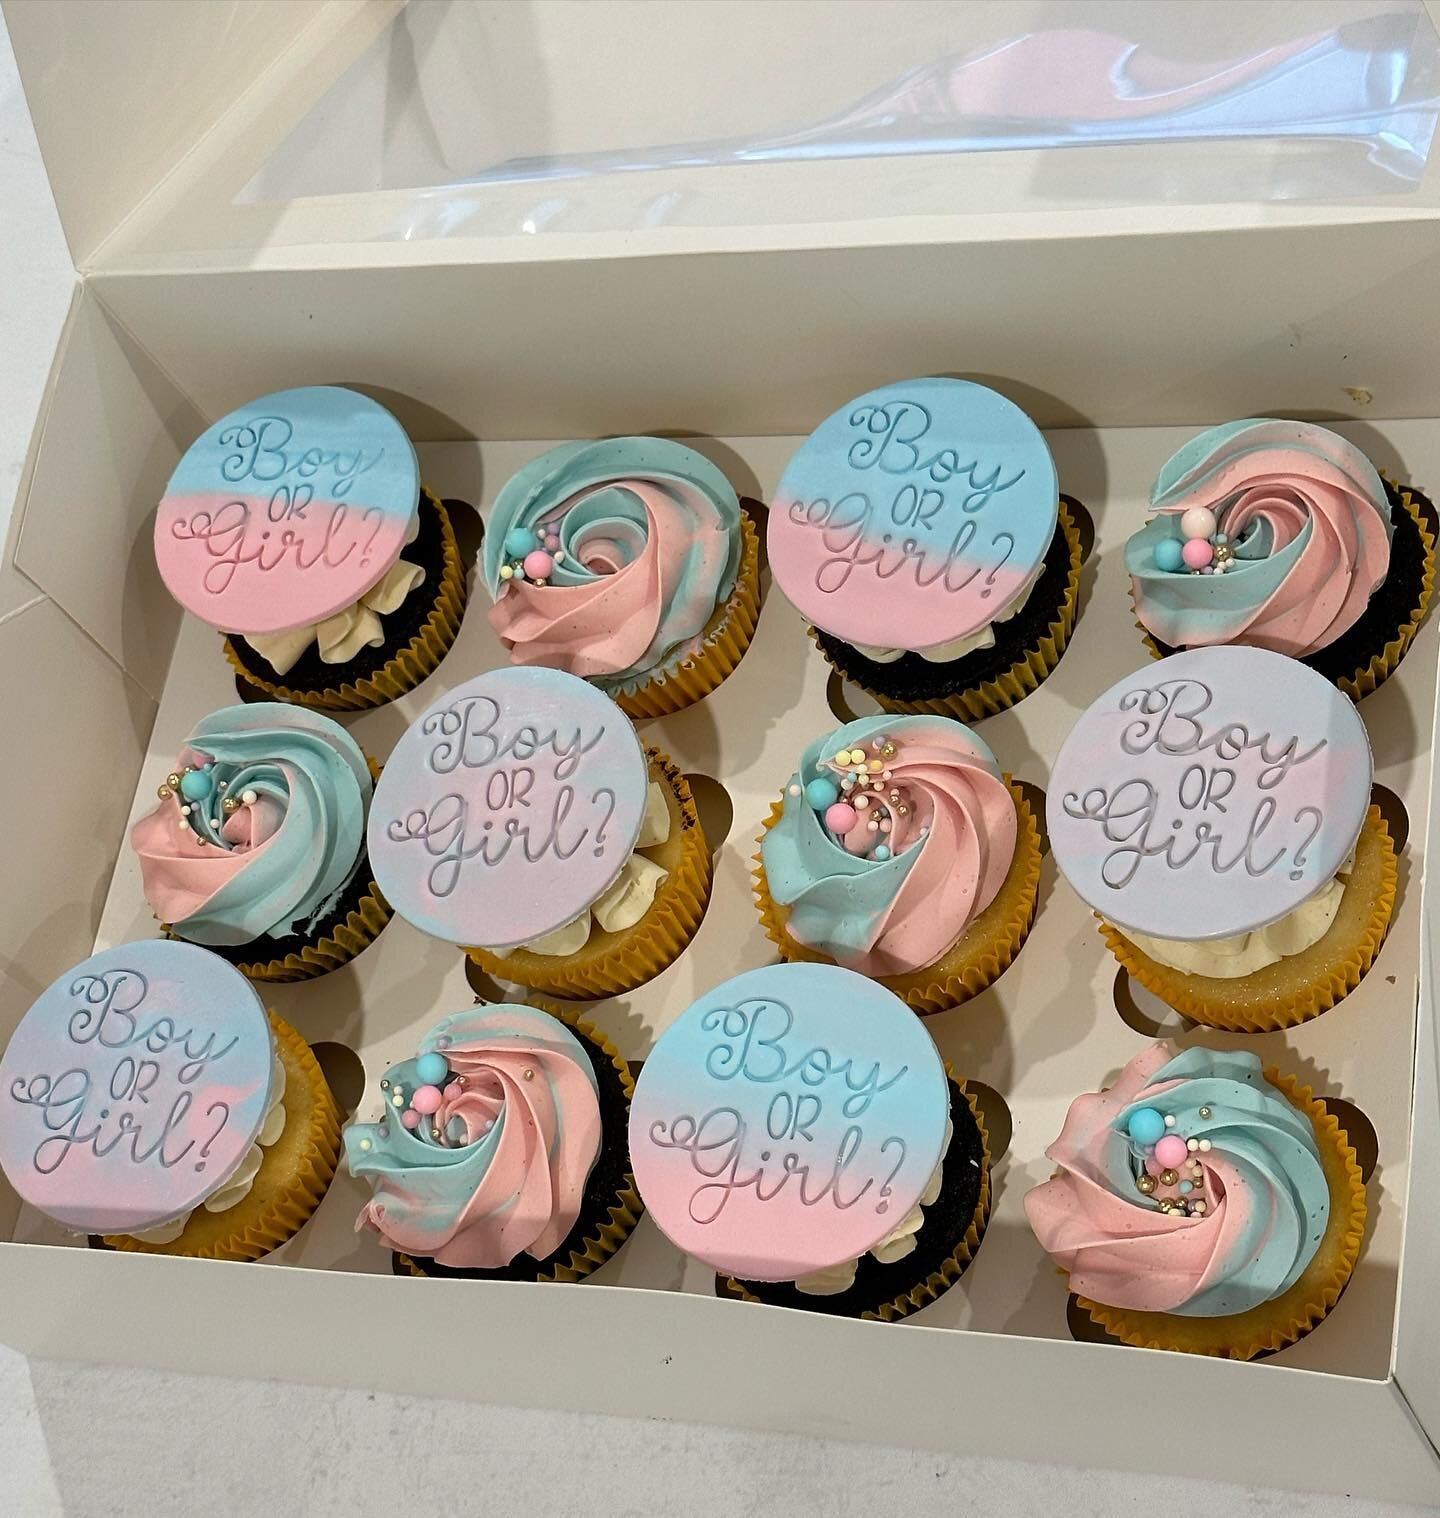 Starting hump day off right with these stunning gender reveal cupcakes 😍😍Colour mill baby blue and baby pink are my absolute favorite shades to use.. bite to reveal the gender.. #newsteadcupcakes #brisbanecupcakes #brisbanefood #therippedbaker #sup